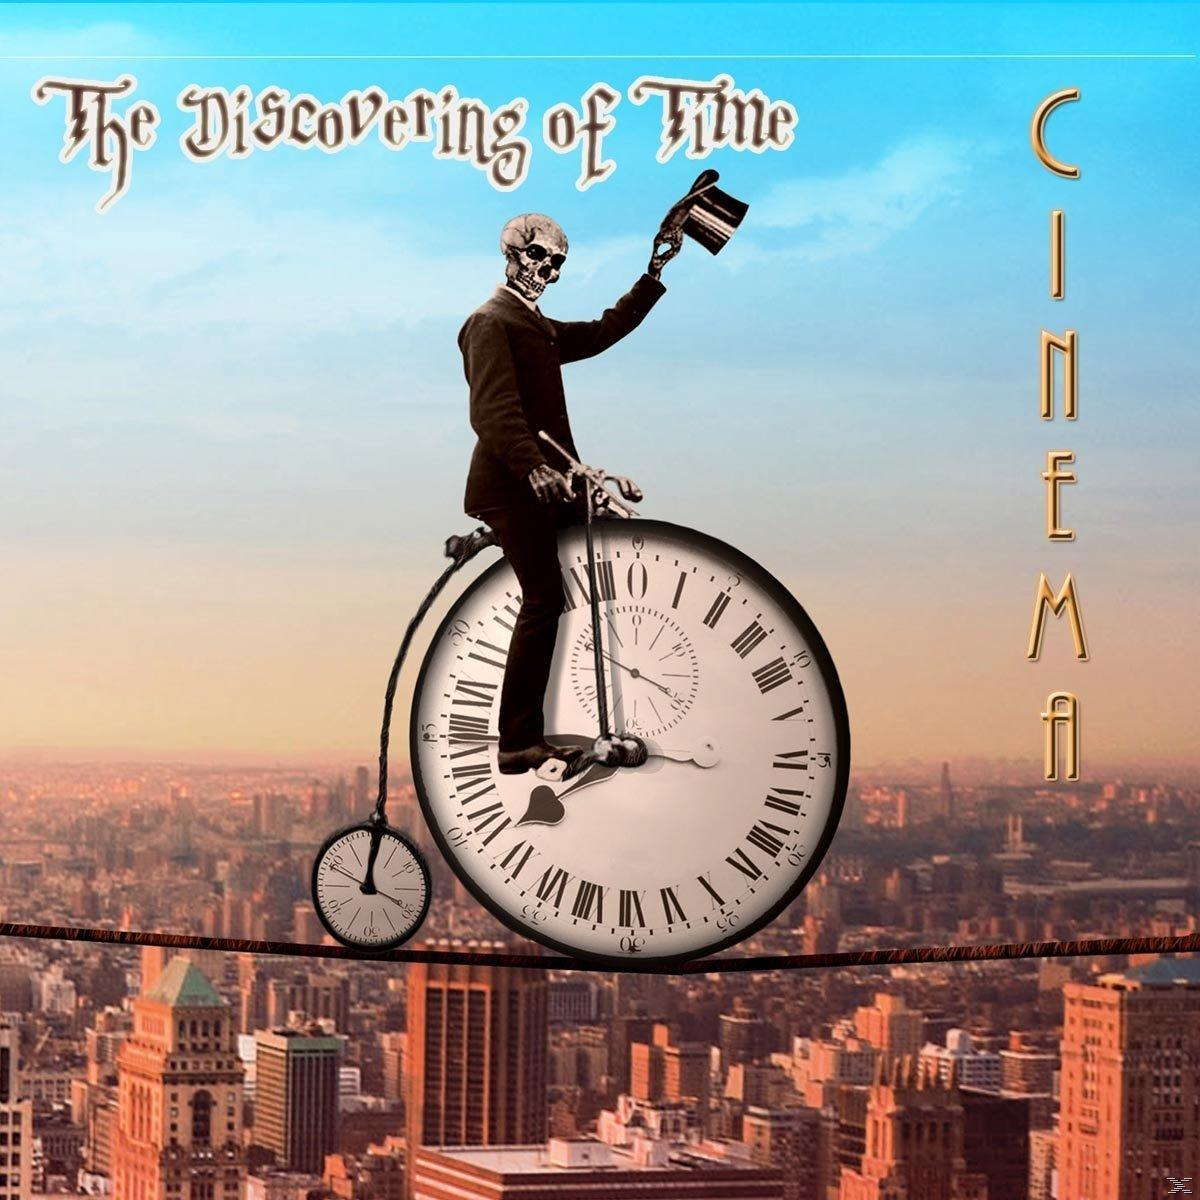 Cinema - The Of Time - Discovering (CD)